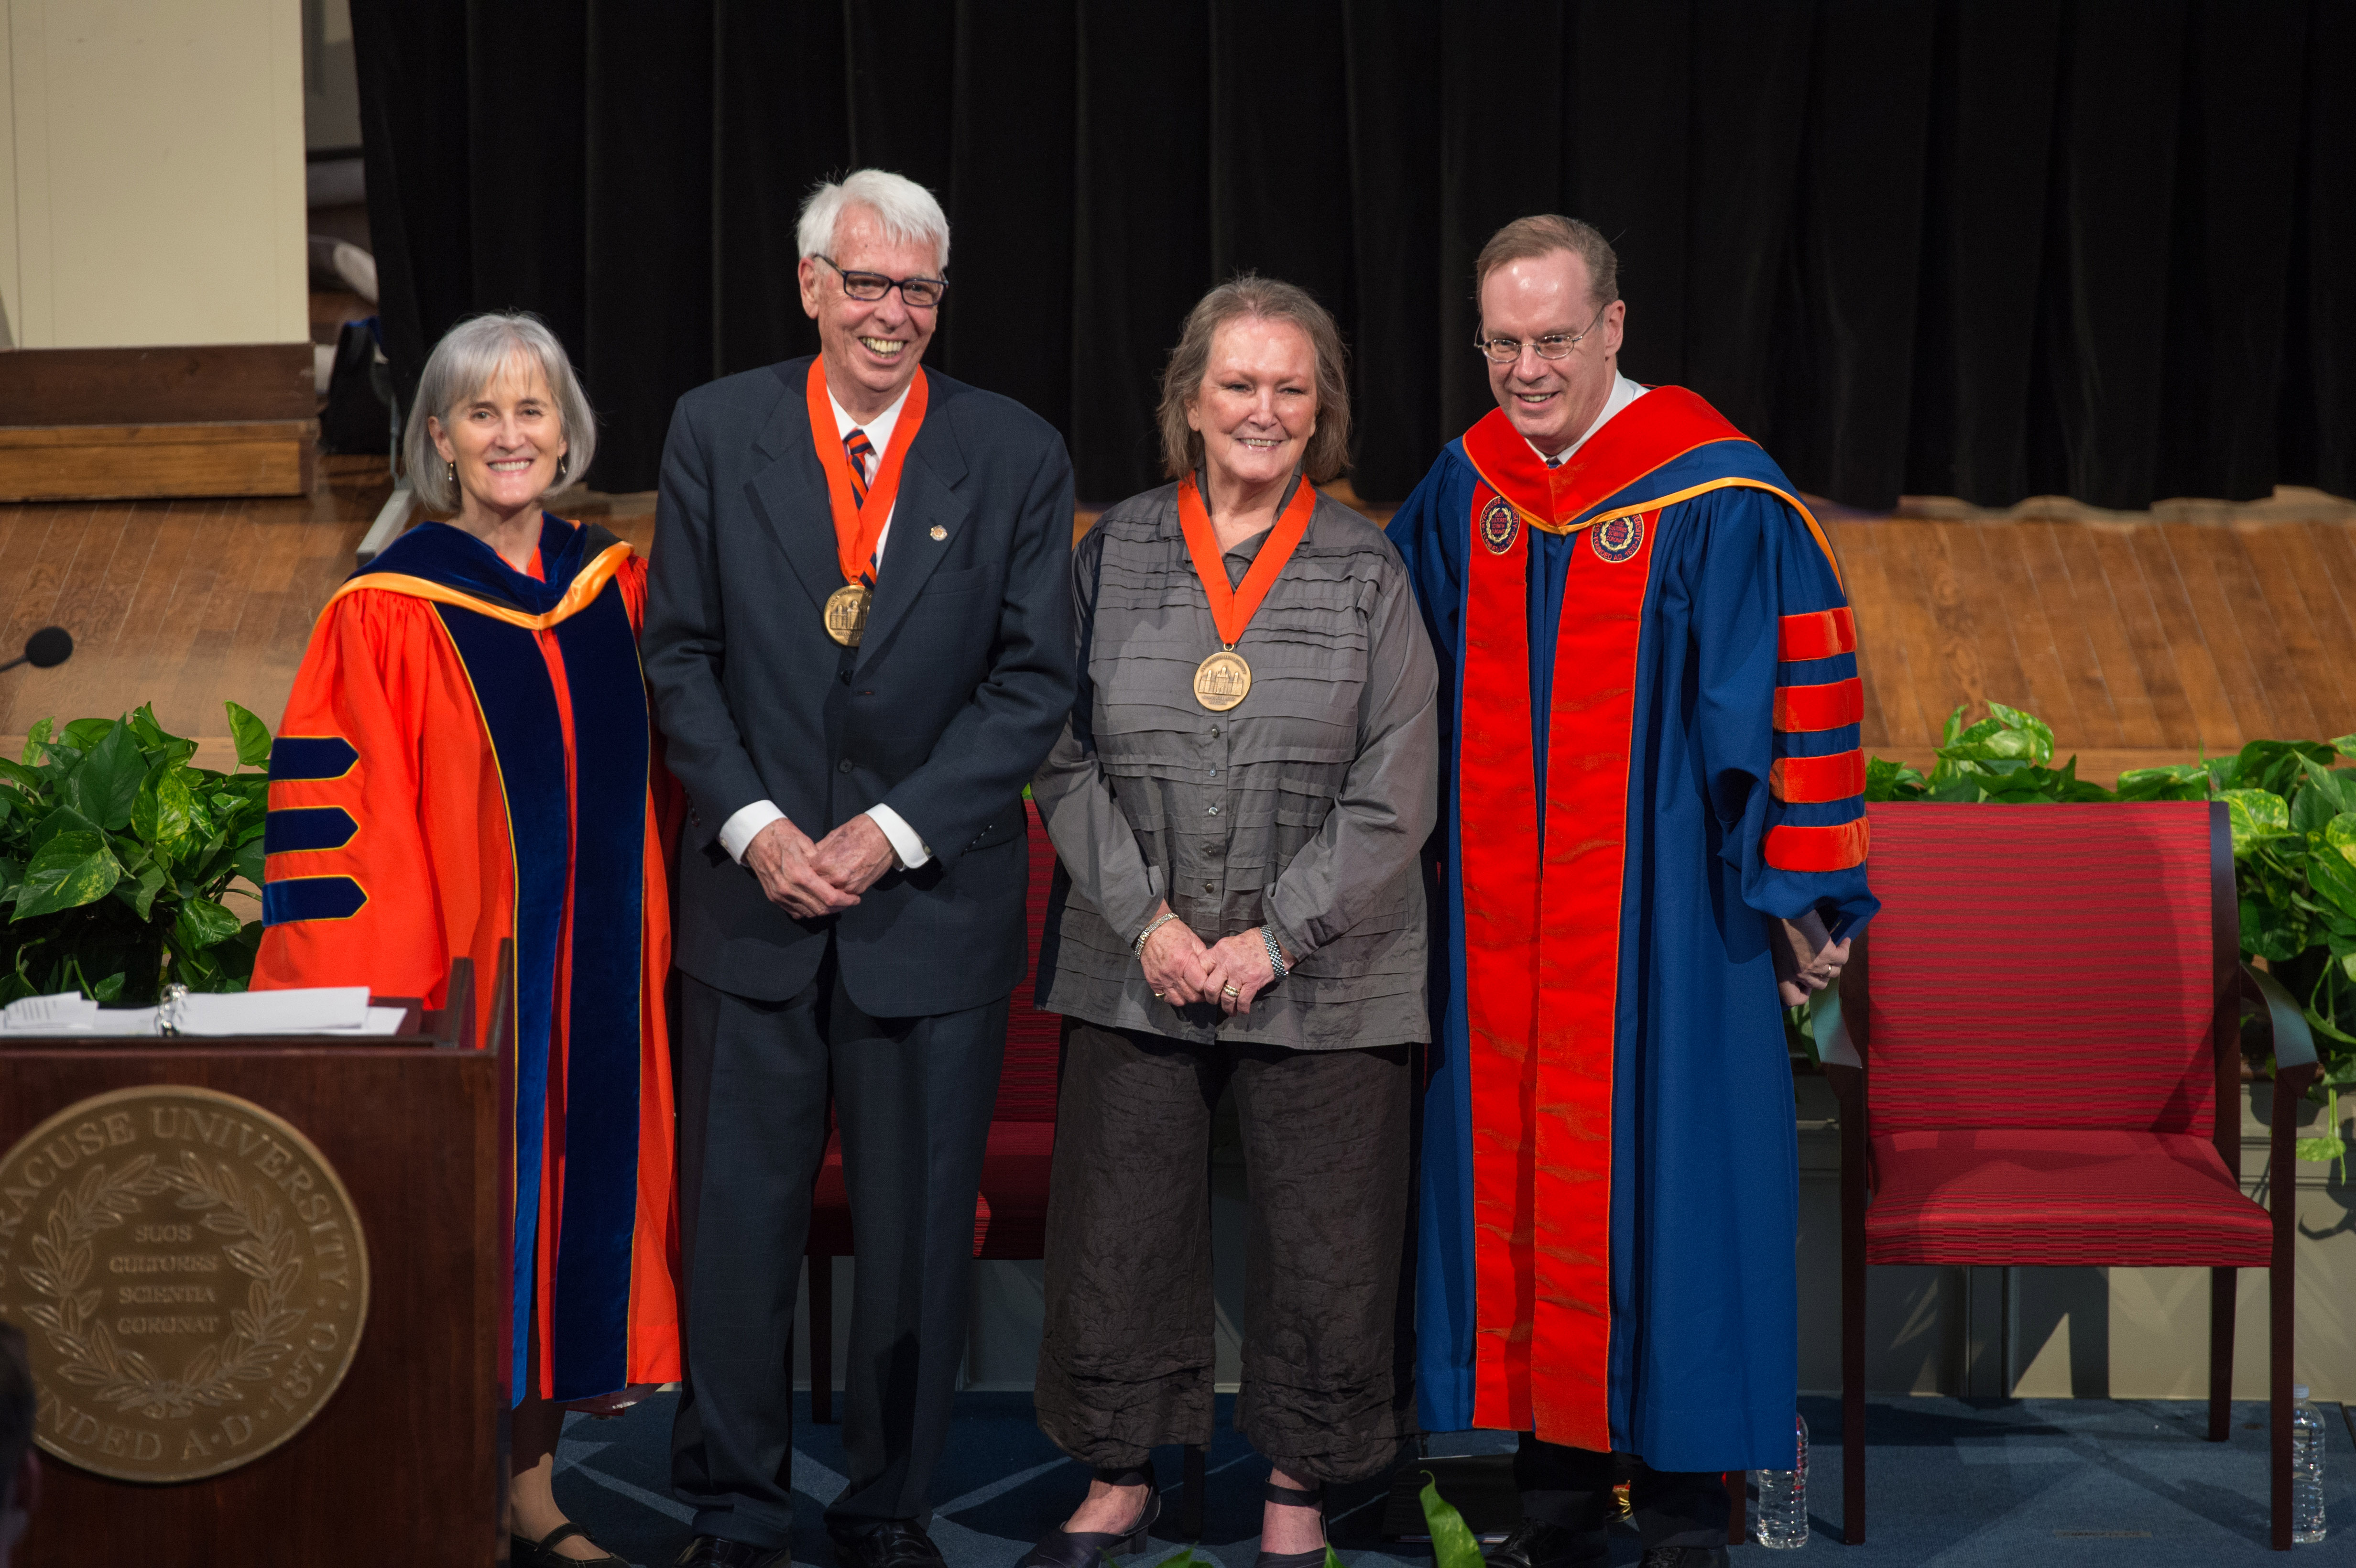 Vice Chancellor and Provost Michele Wheatly, Chancellor’s Medal recipients Sam and Carolyn Clemence, and Chancellor Kent Syverud on stage at Hendricks Chapel at the One University Awards Ceremony. 